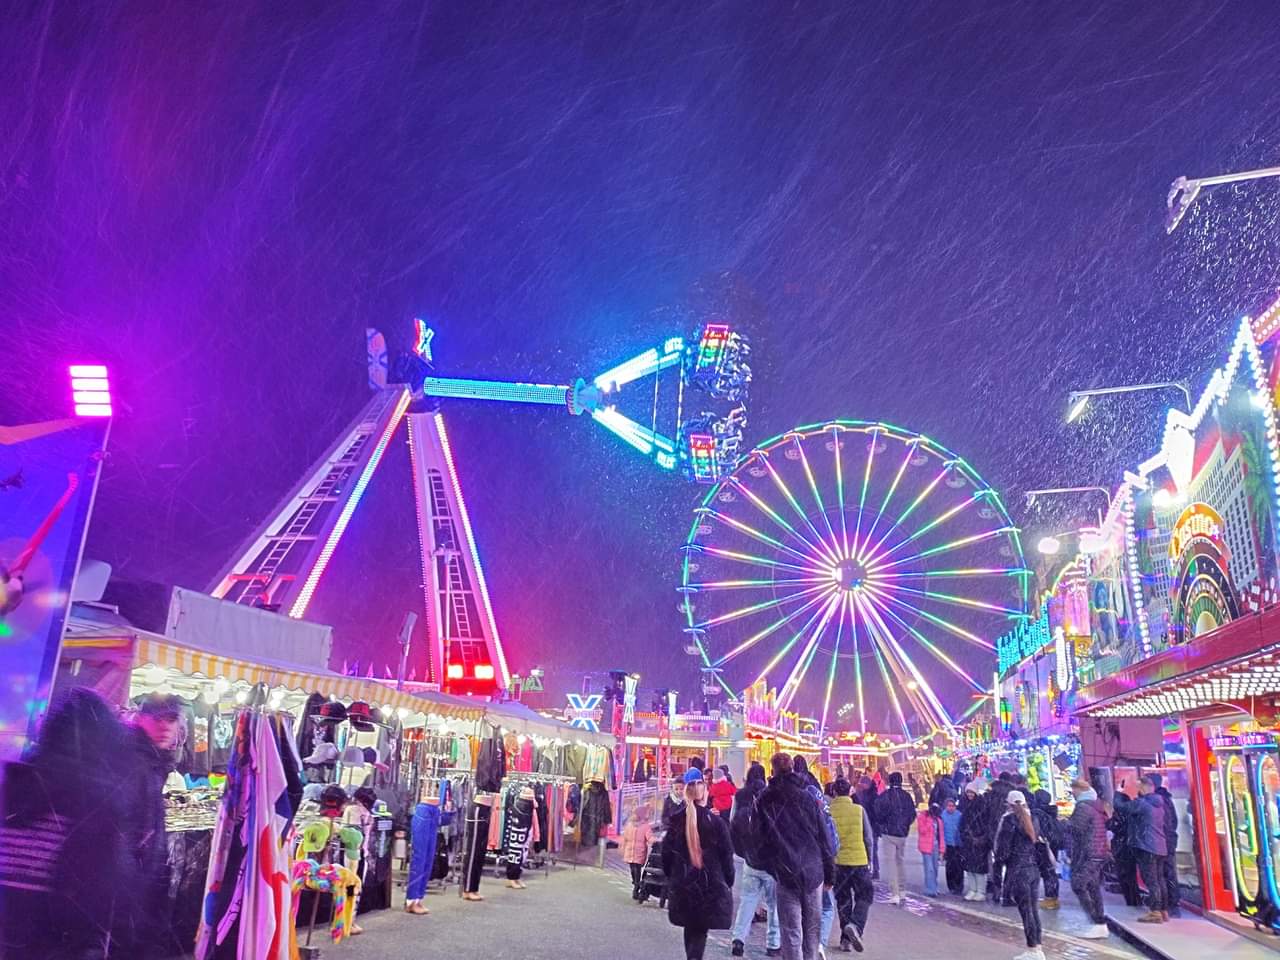 What are fairground lights called?